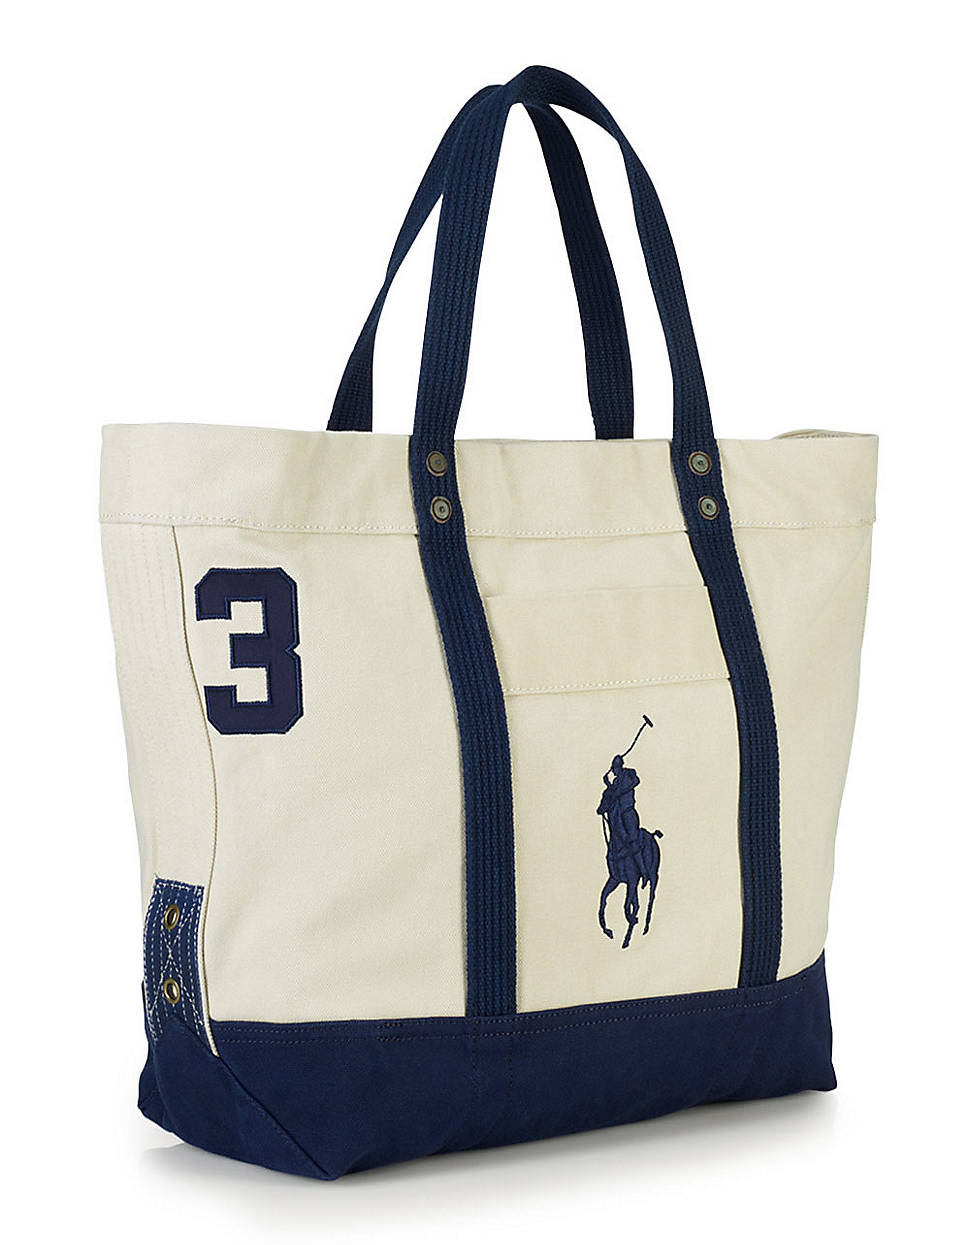 Lyst - Polo ralph lauren Canvas Pony Tote Bag in White for Men